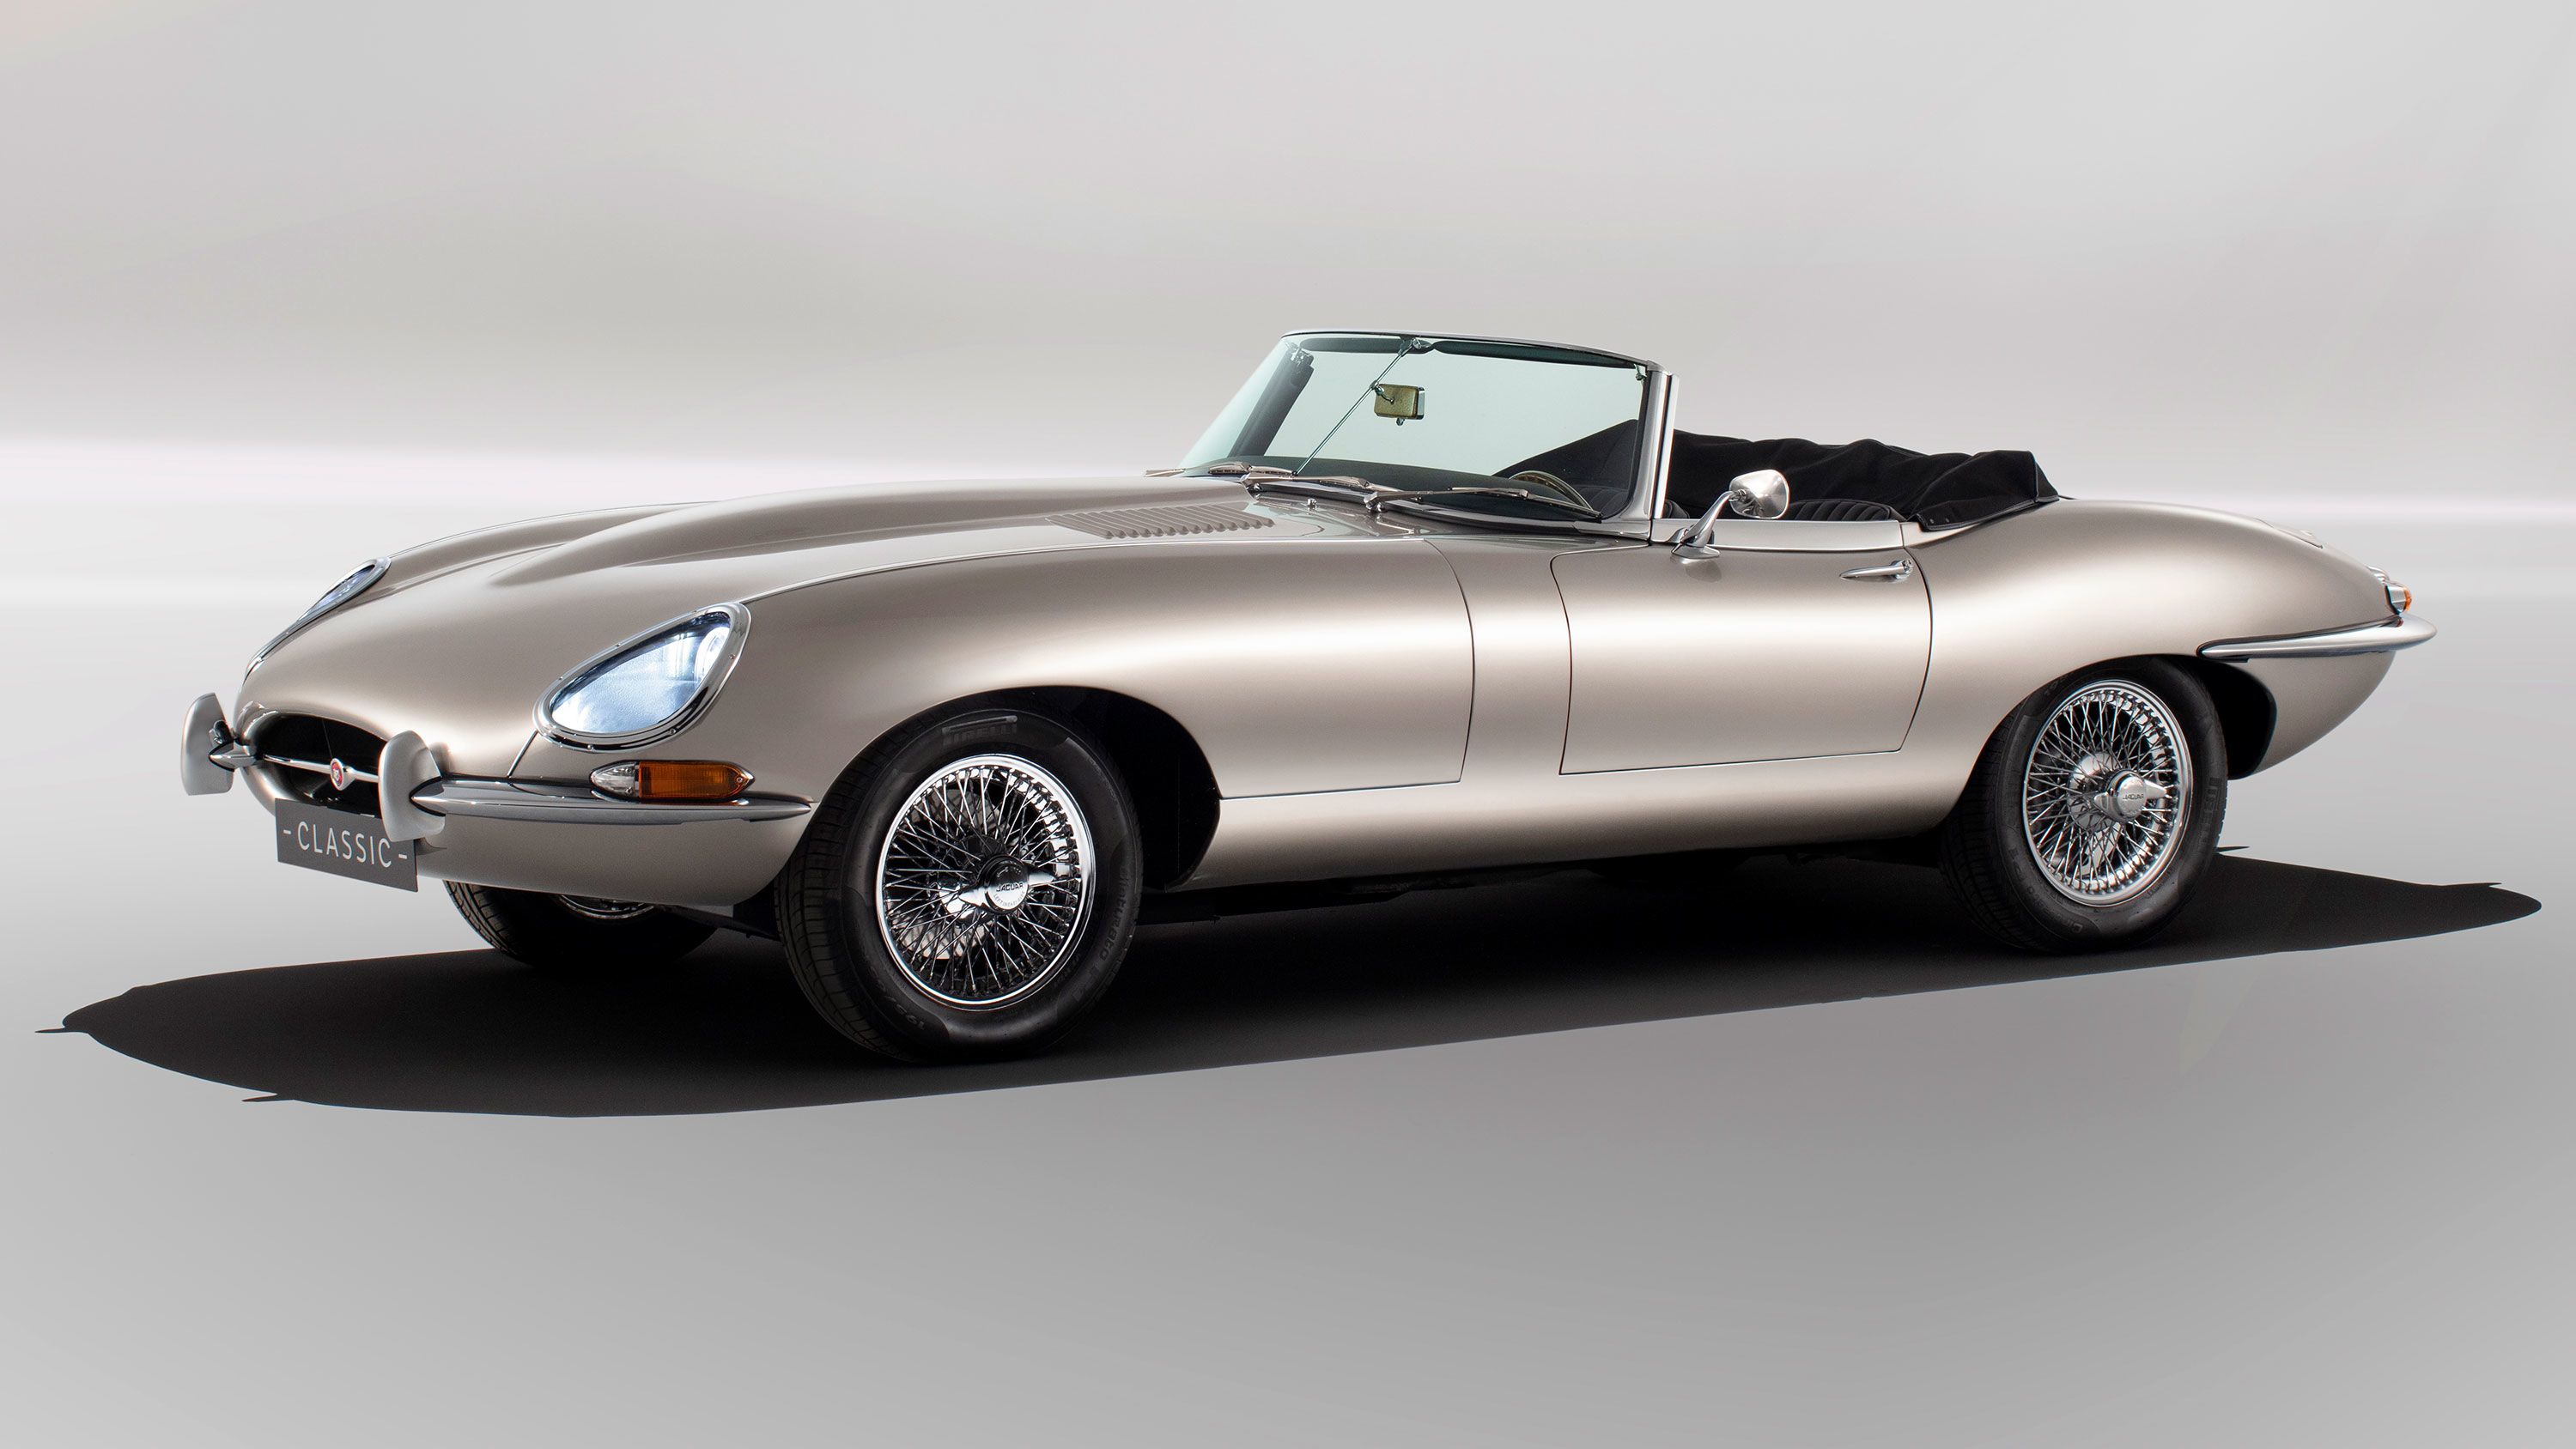 Jaguar to make an electric version of 1960s sports car the E-Type